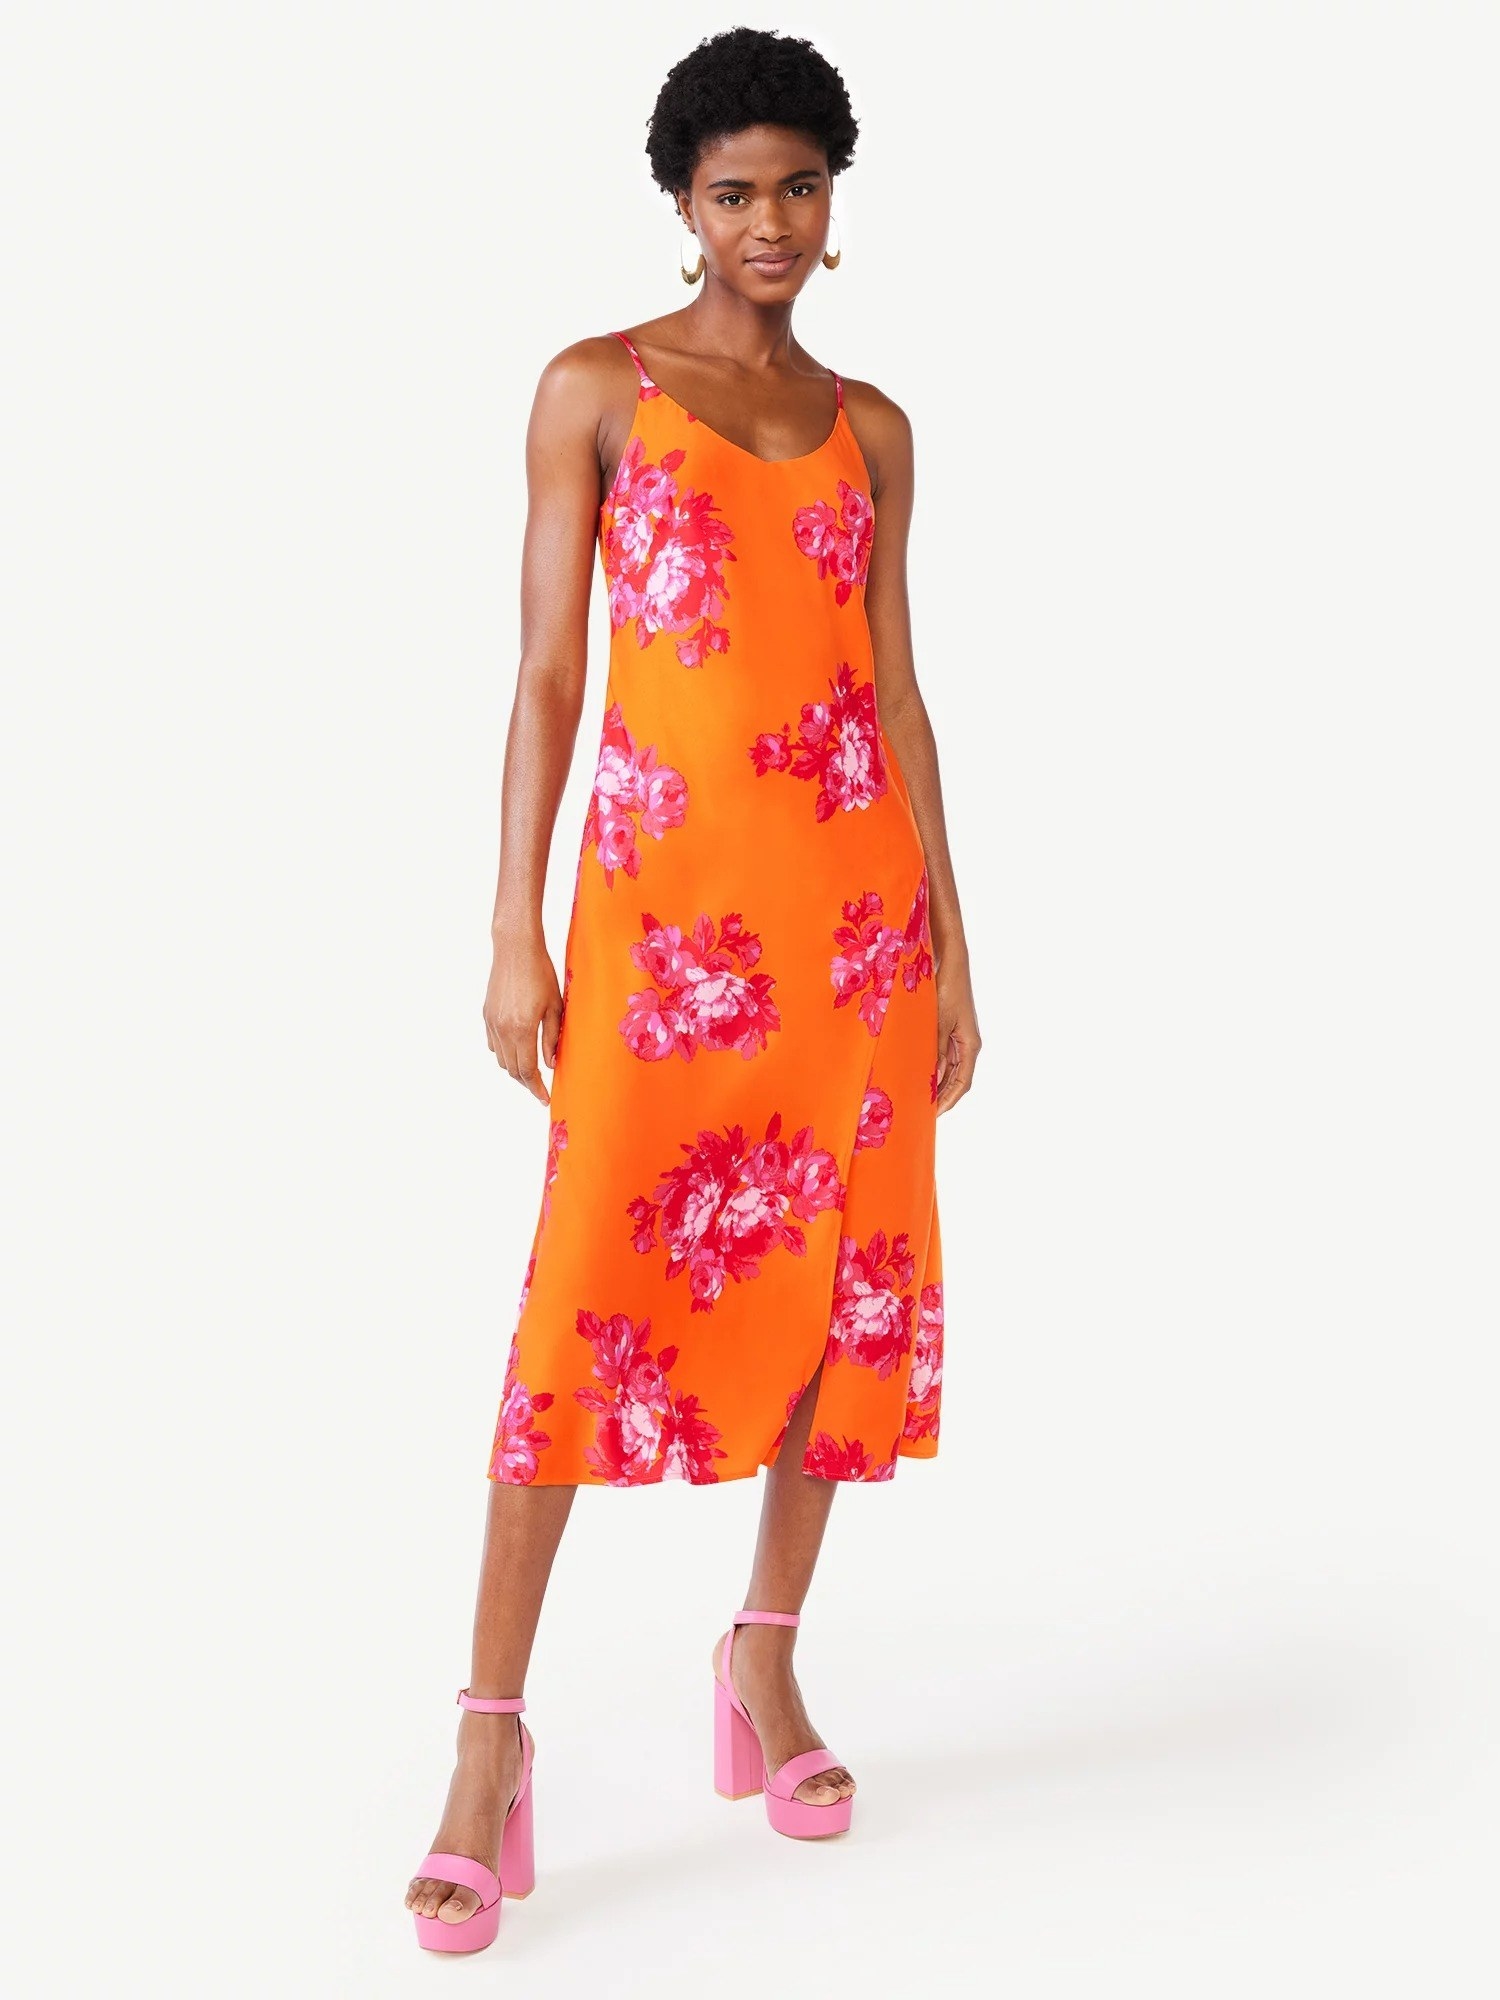 20 New Season Dresses To Brighten Up Your Week